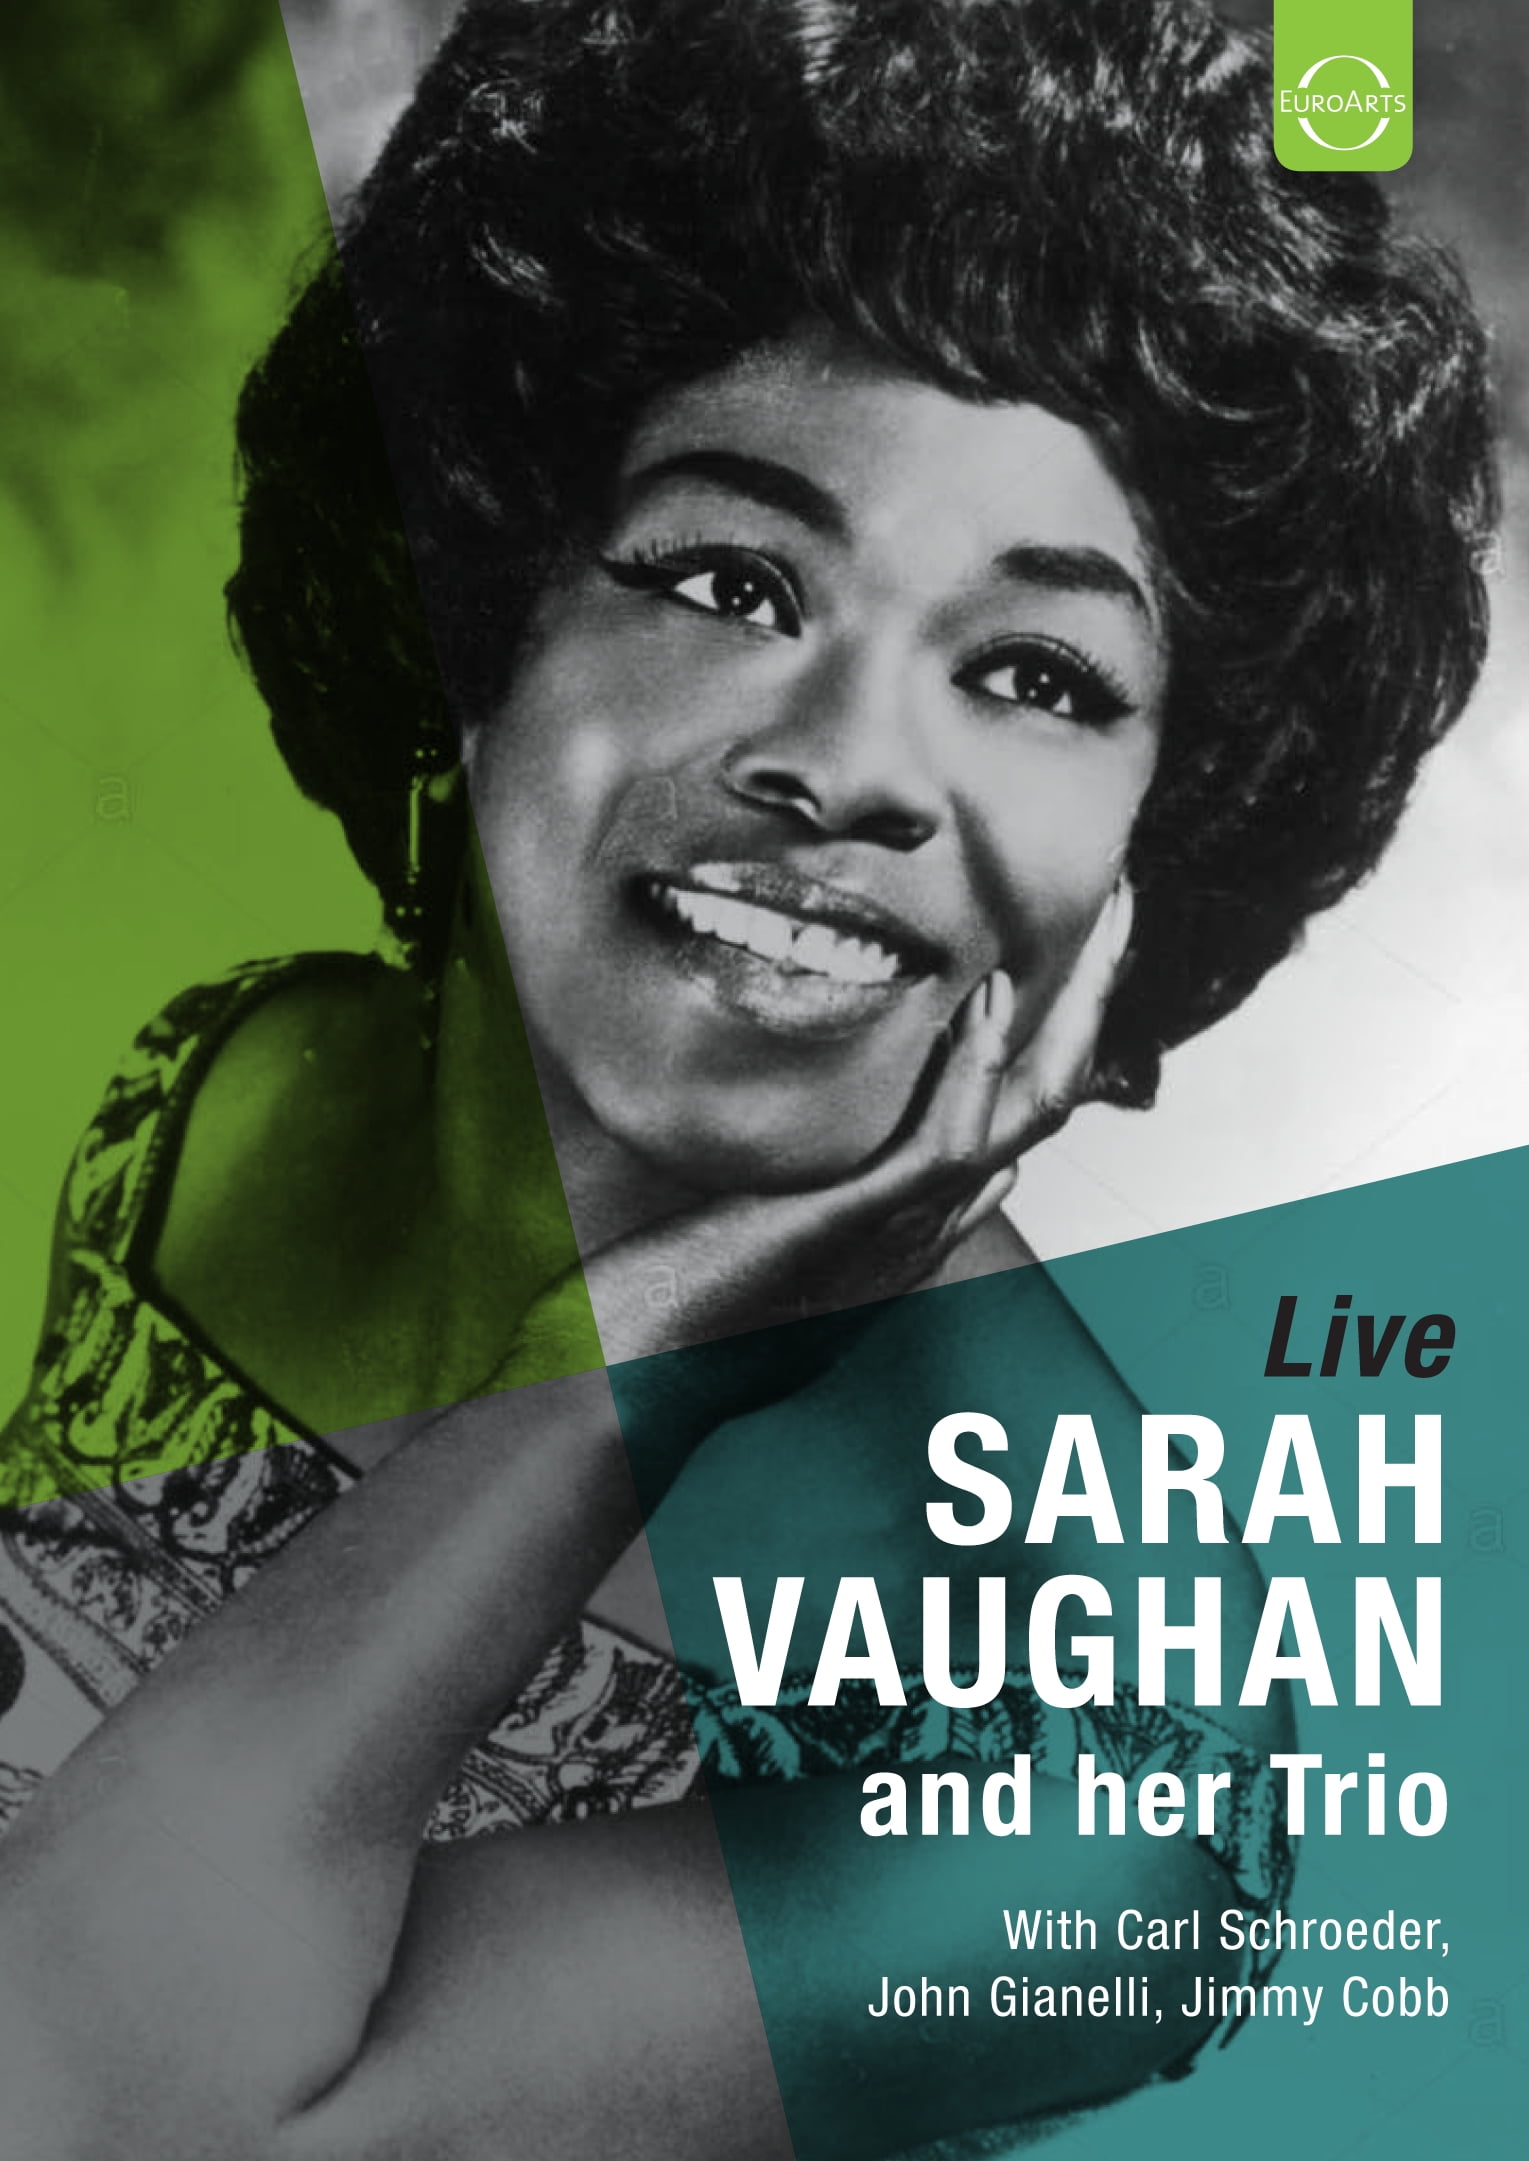 reprint photo Sarah Vaughan Music Concert Mini Poster 2 sizes to pick from 